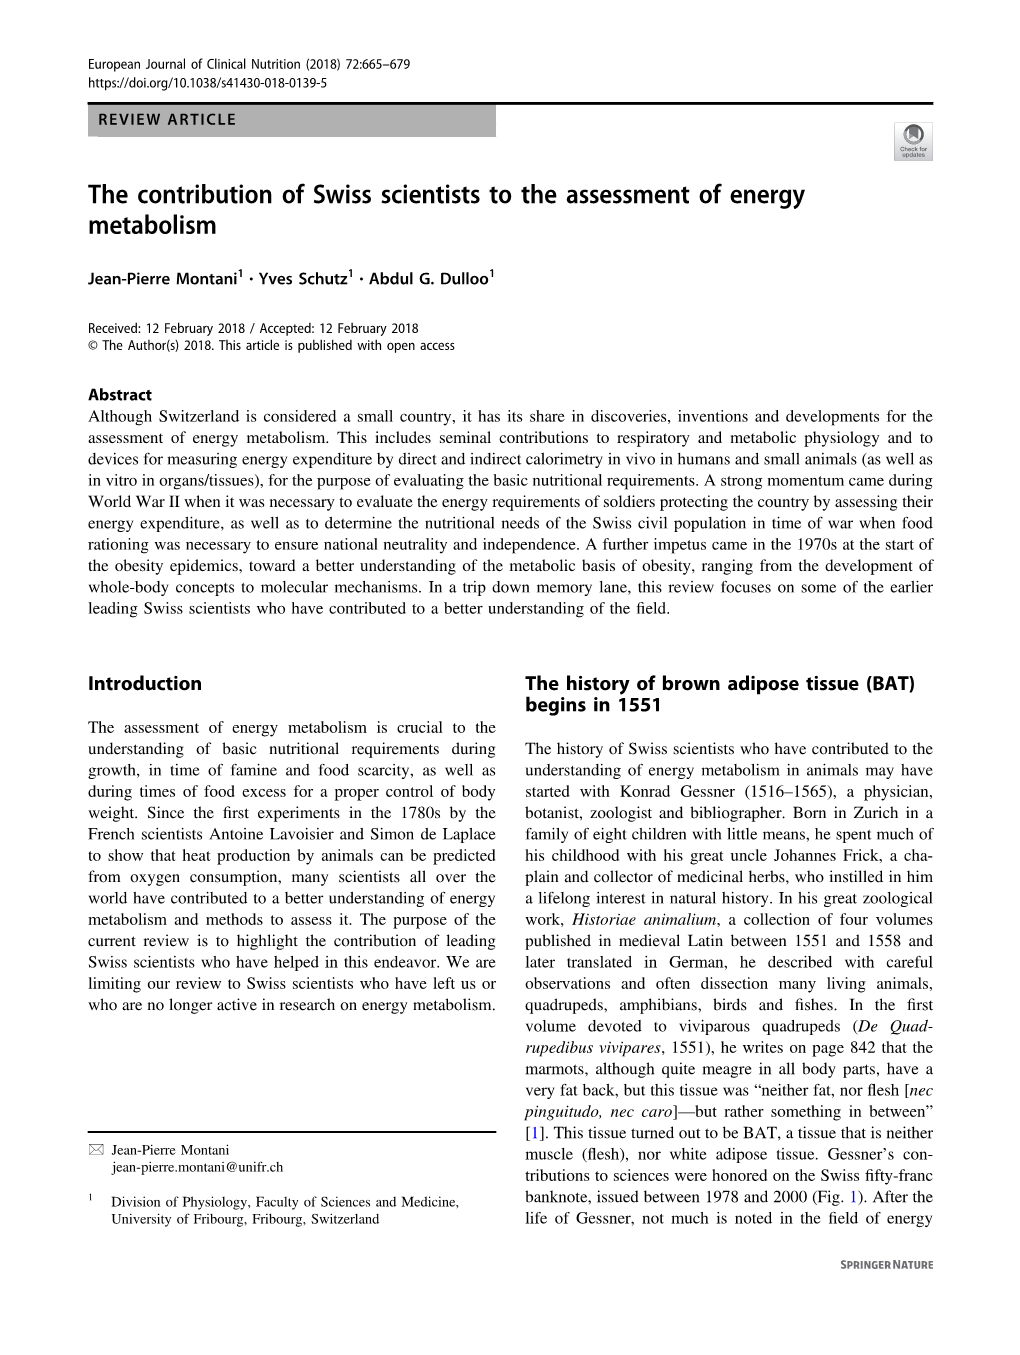 The Contribution of Swiss Scientists to the Assessment of Energy Metabolism